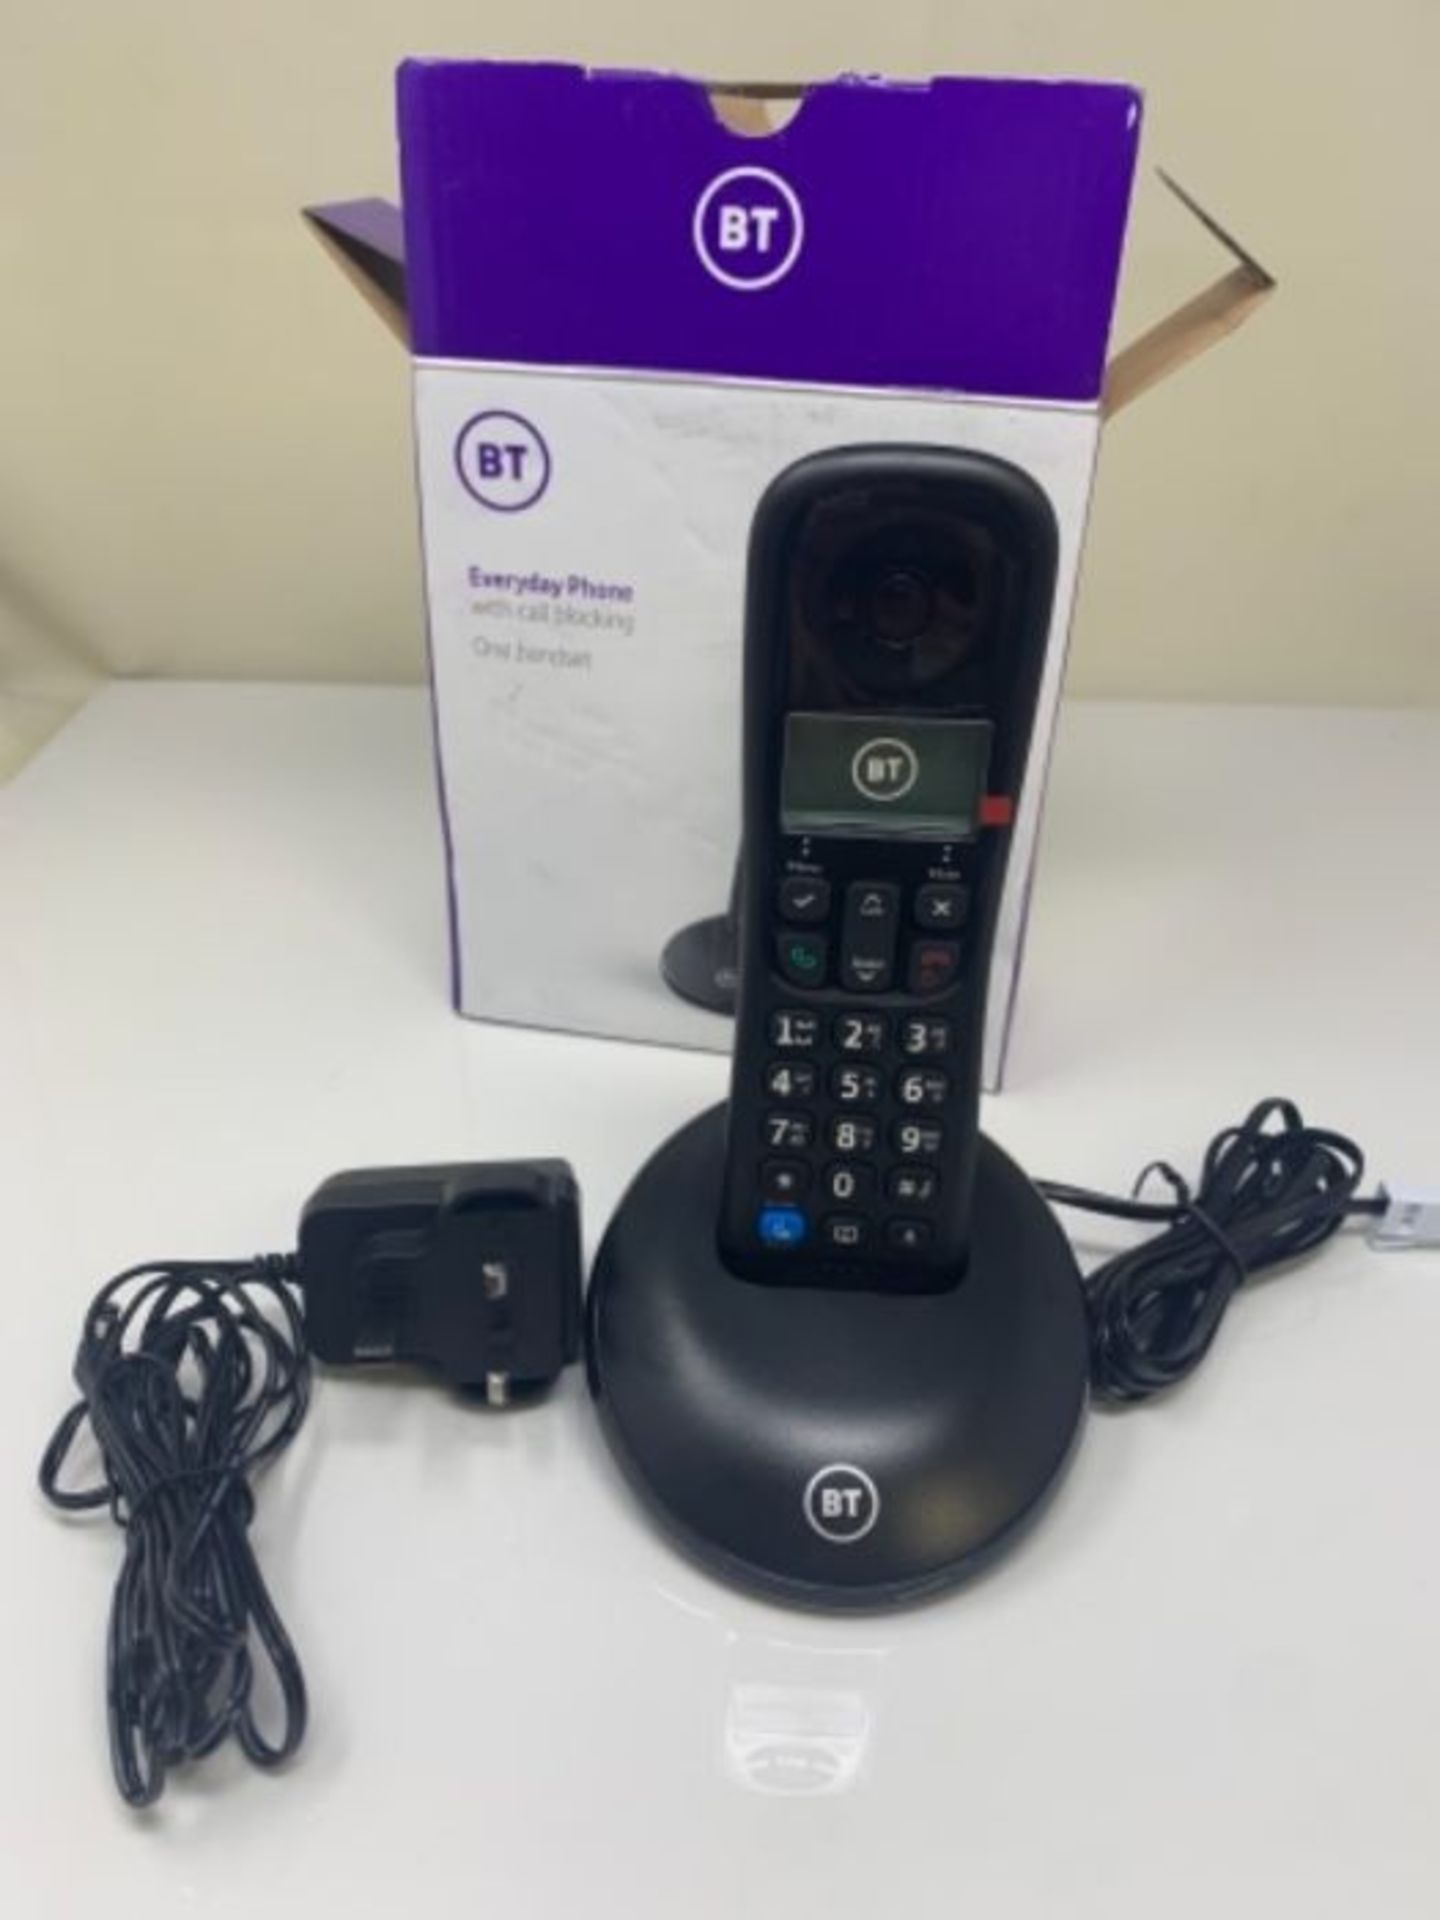 BT Everyday Cordless Home Phone with Basic Call Blocking, Single Handset Pack, Black - Image 3 of 3